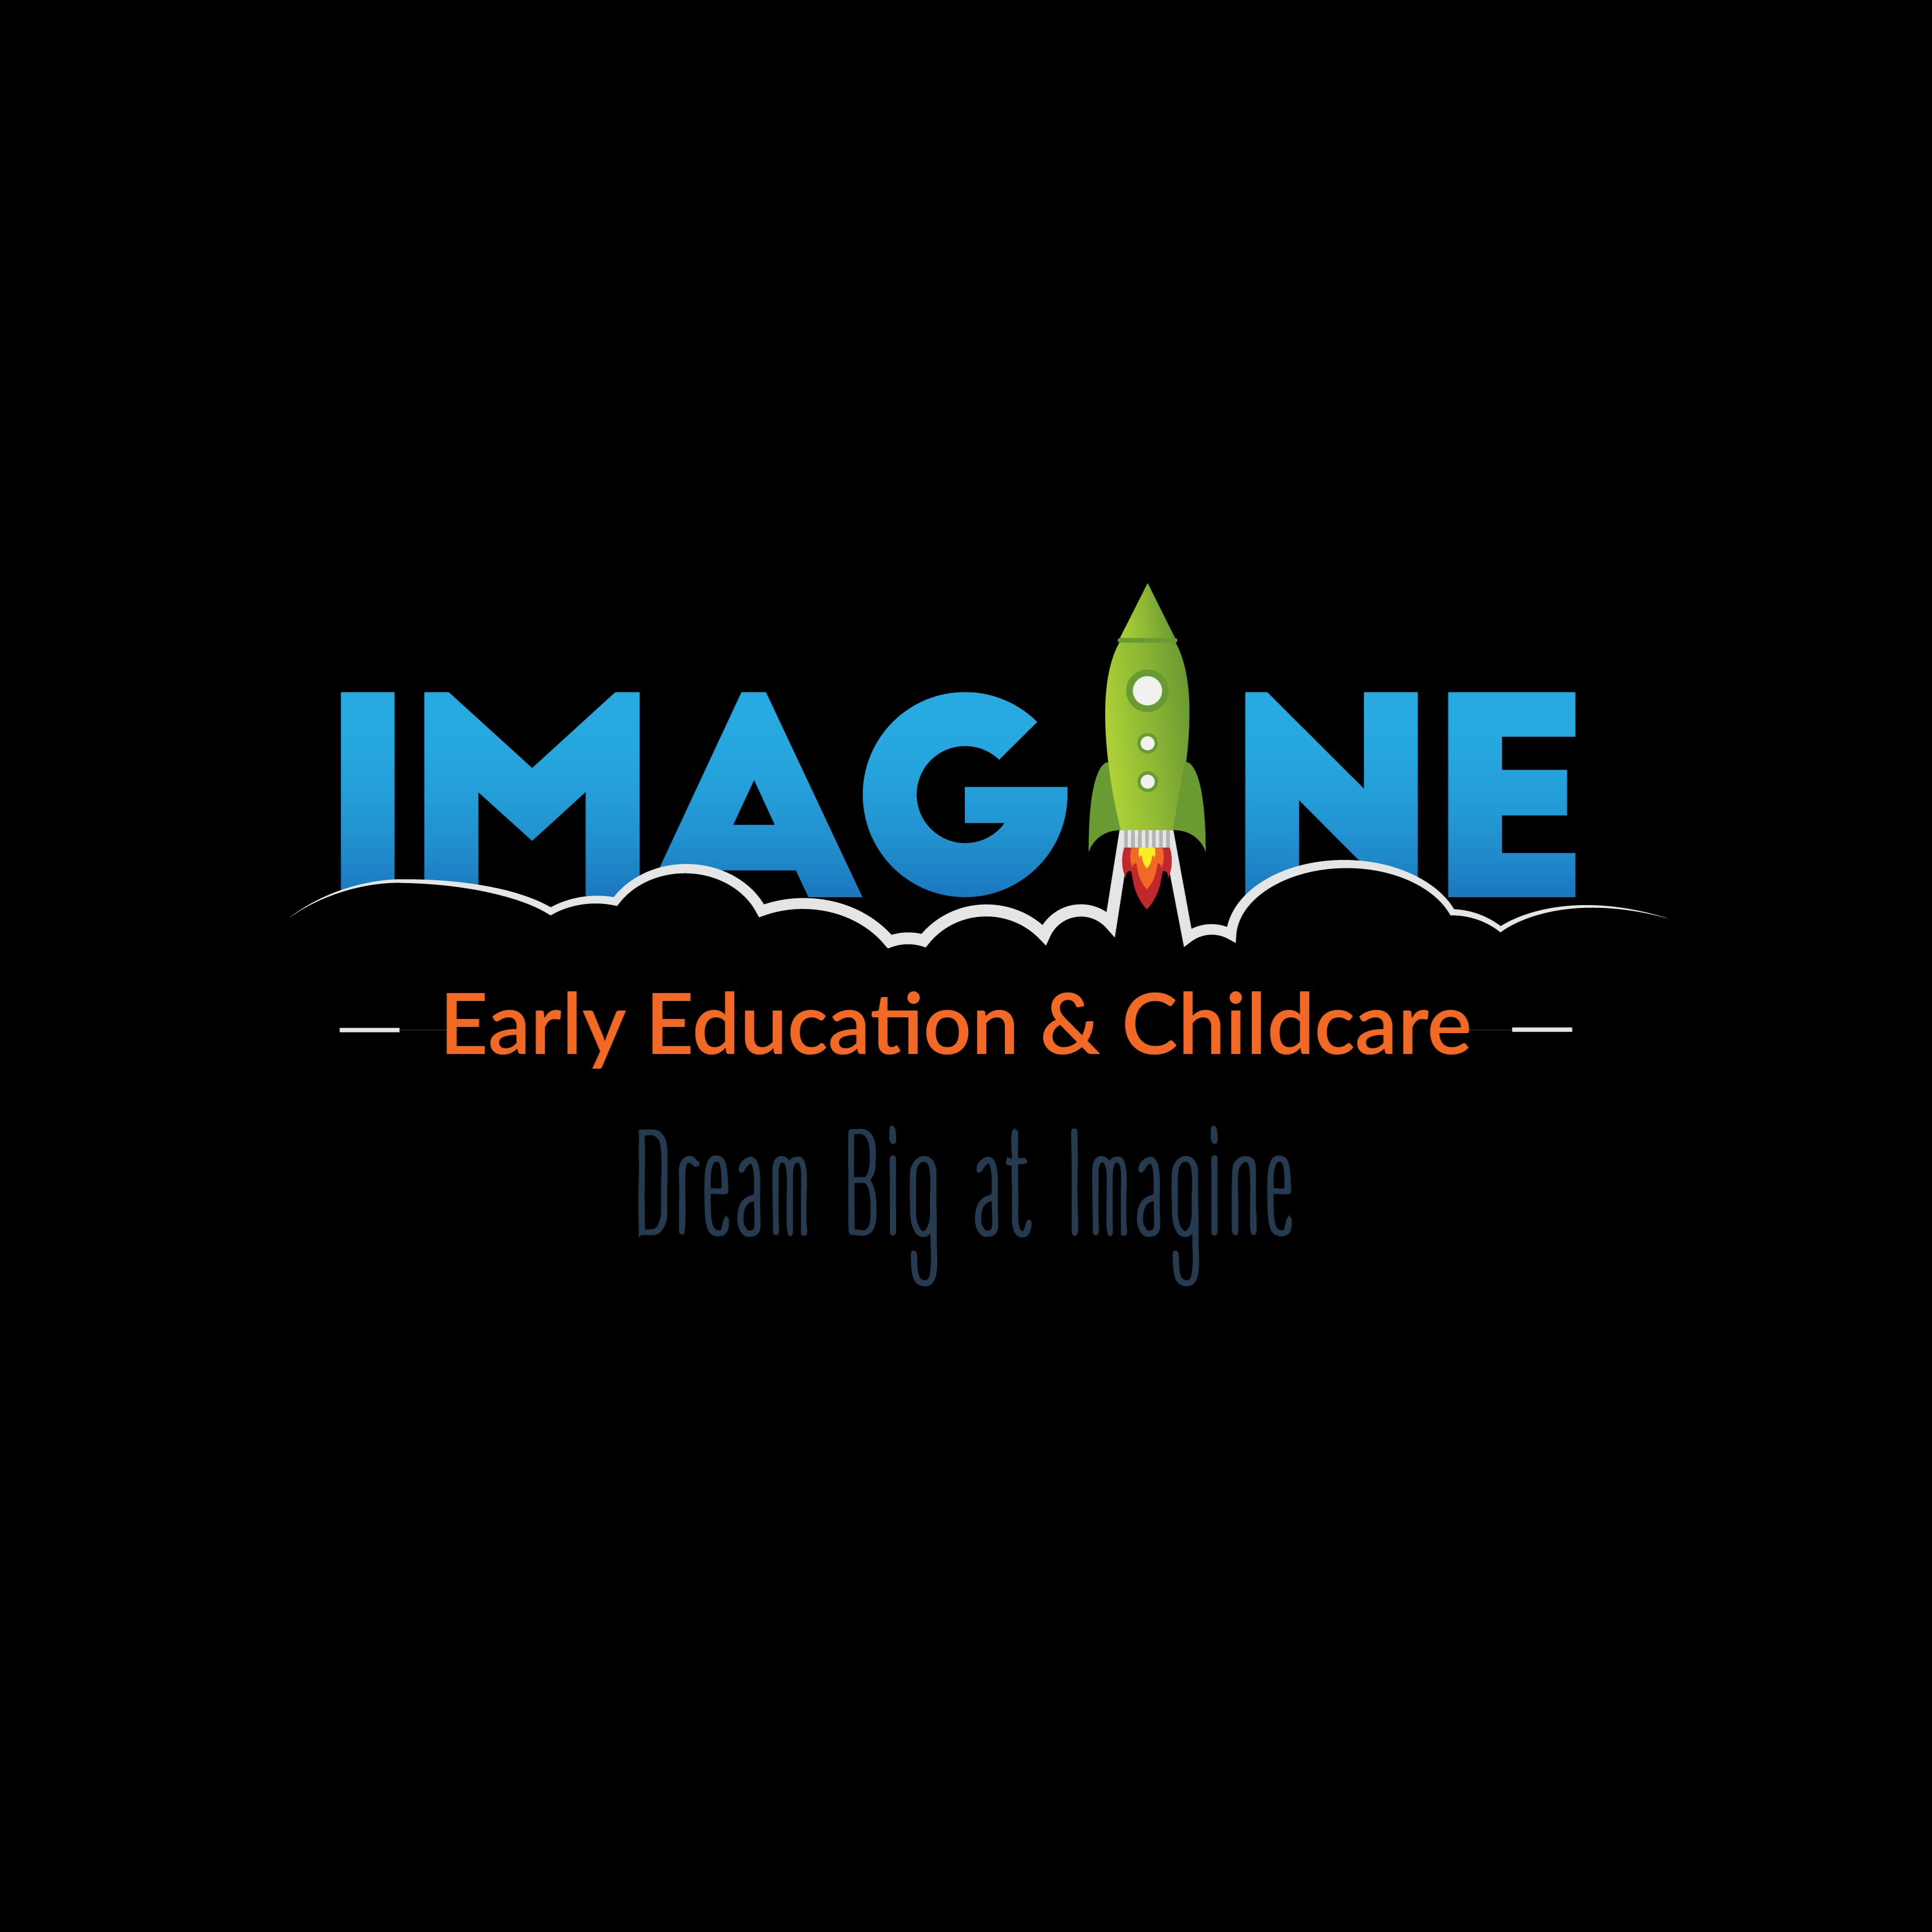 Imagine Early Education & Childcare of Eagle Springs